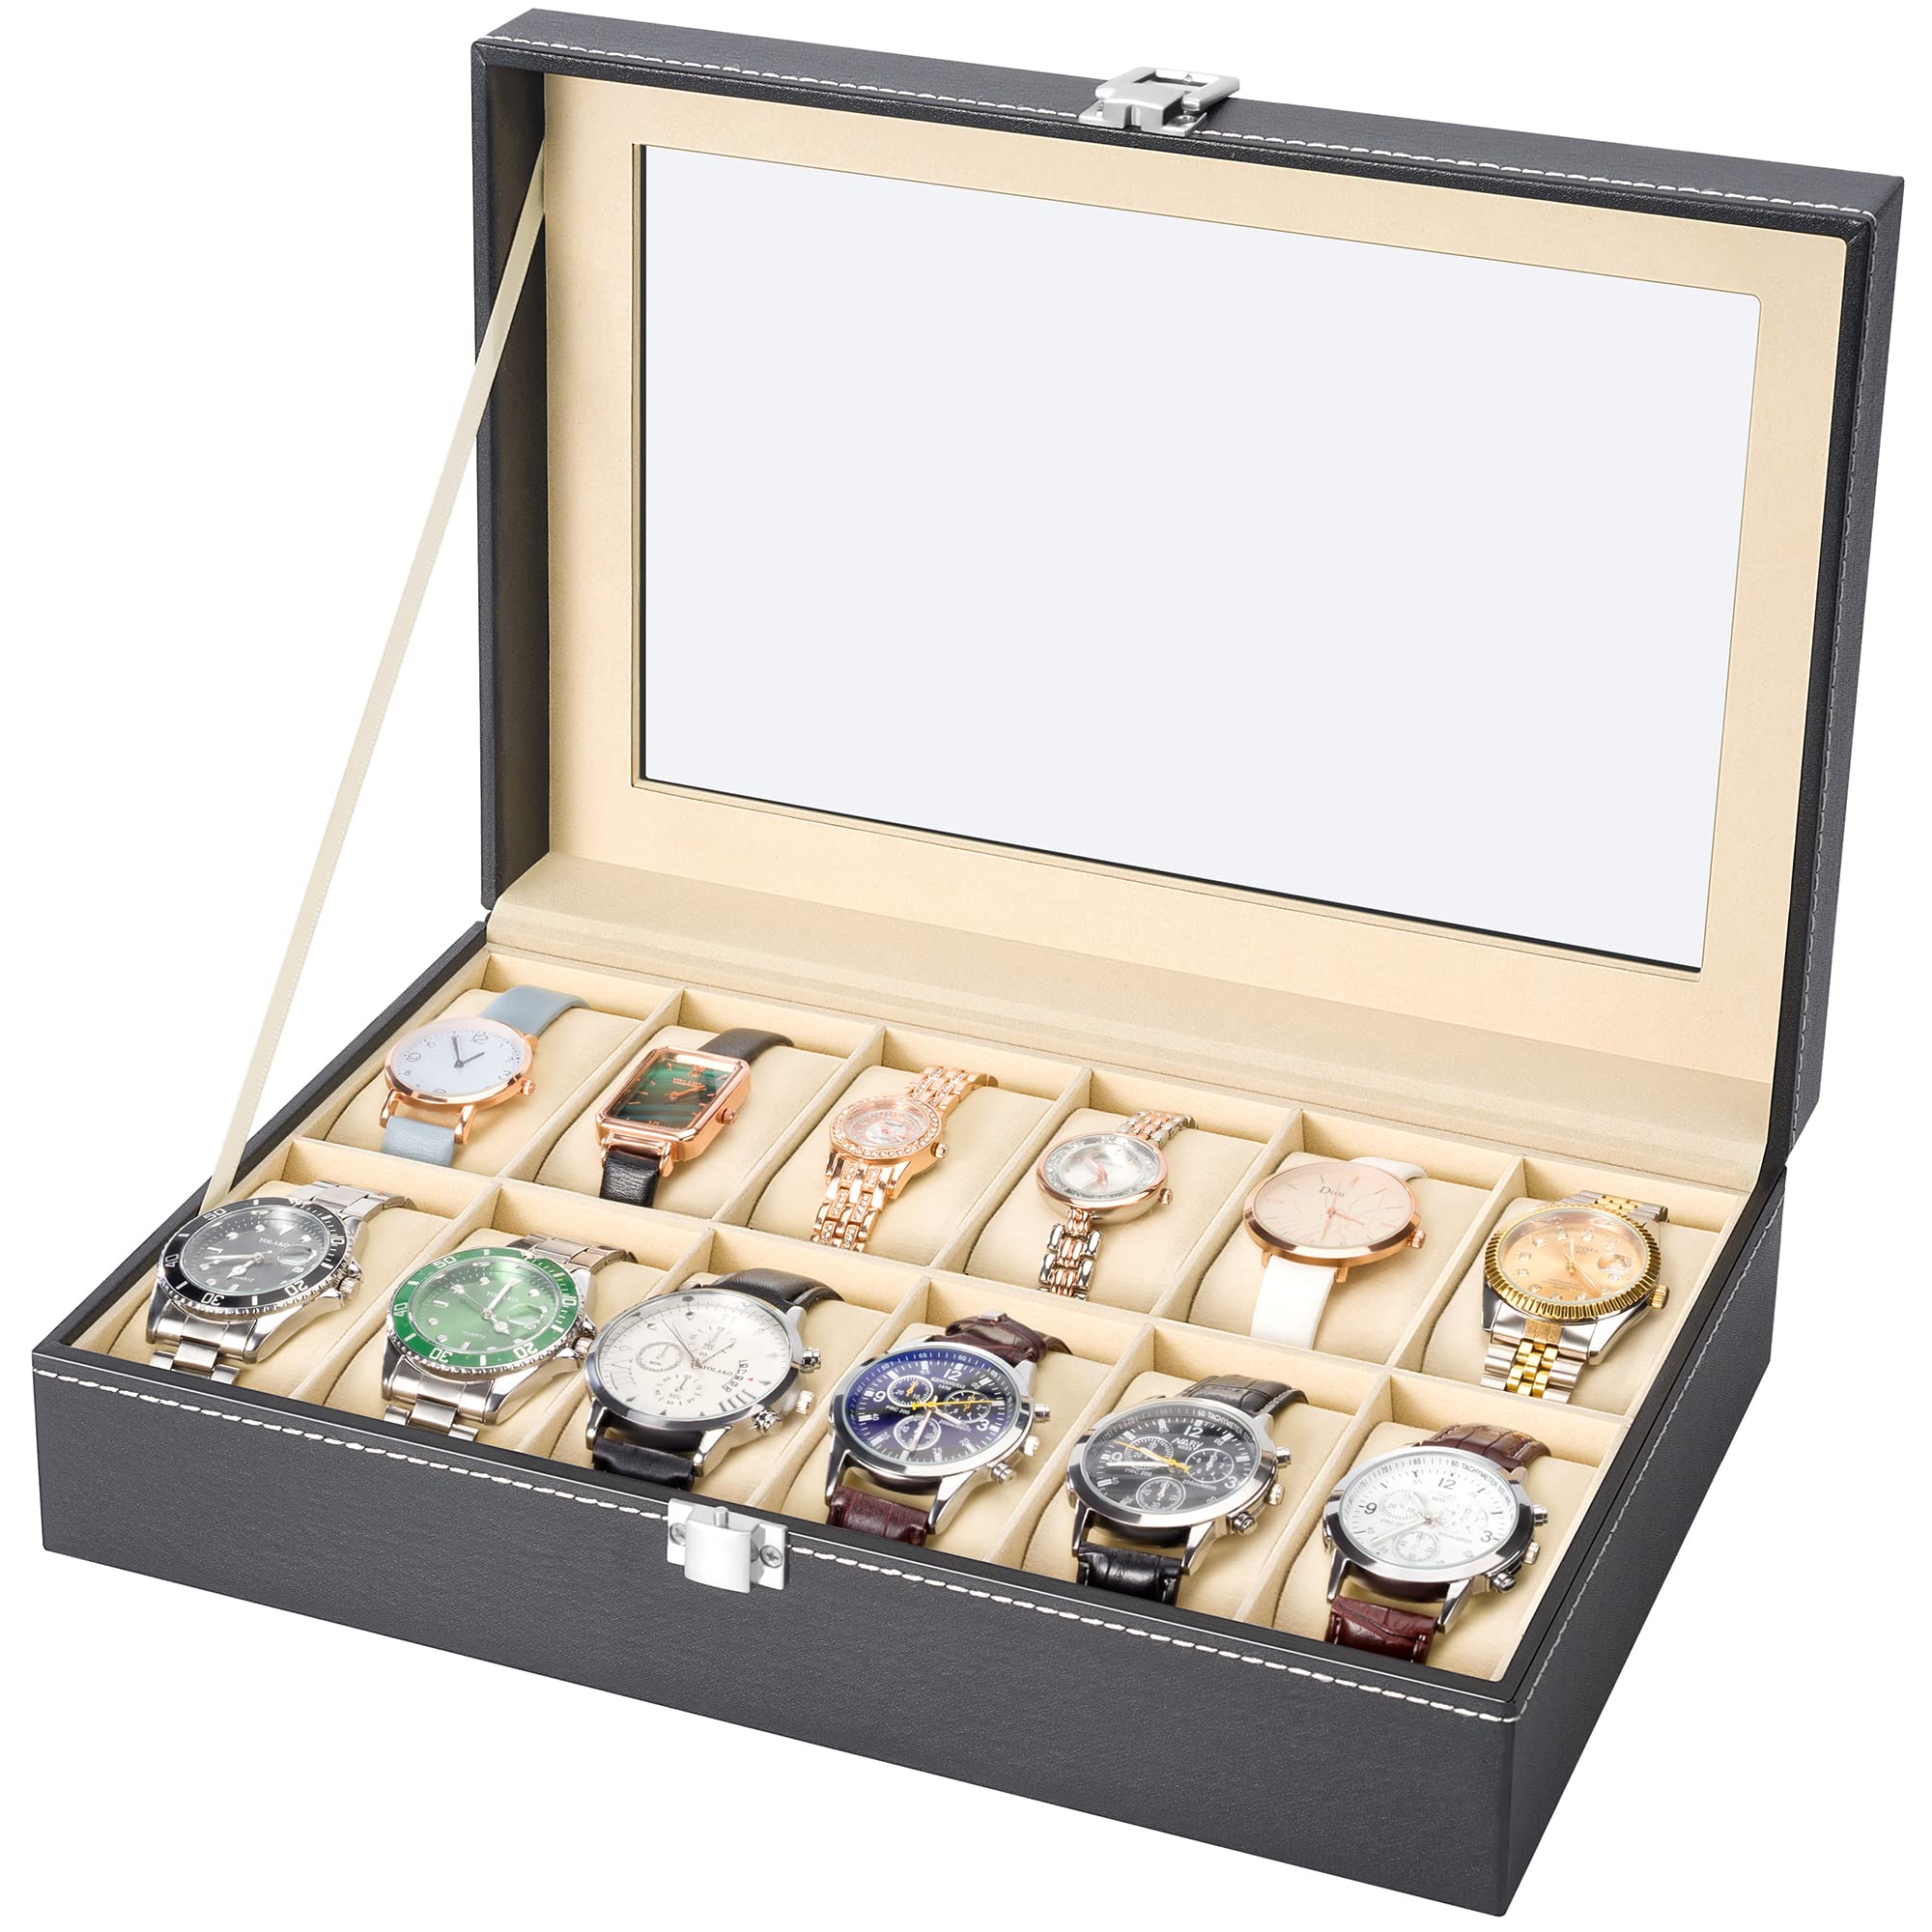 READAEER 12 Slot PU Leather Watch Box Display Case Jewelry Organizer with Glass Top